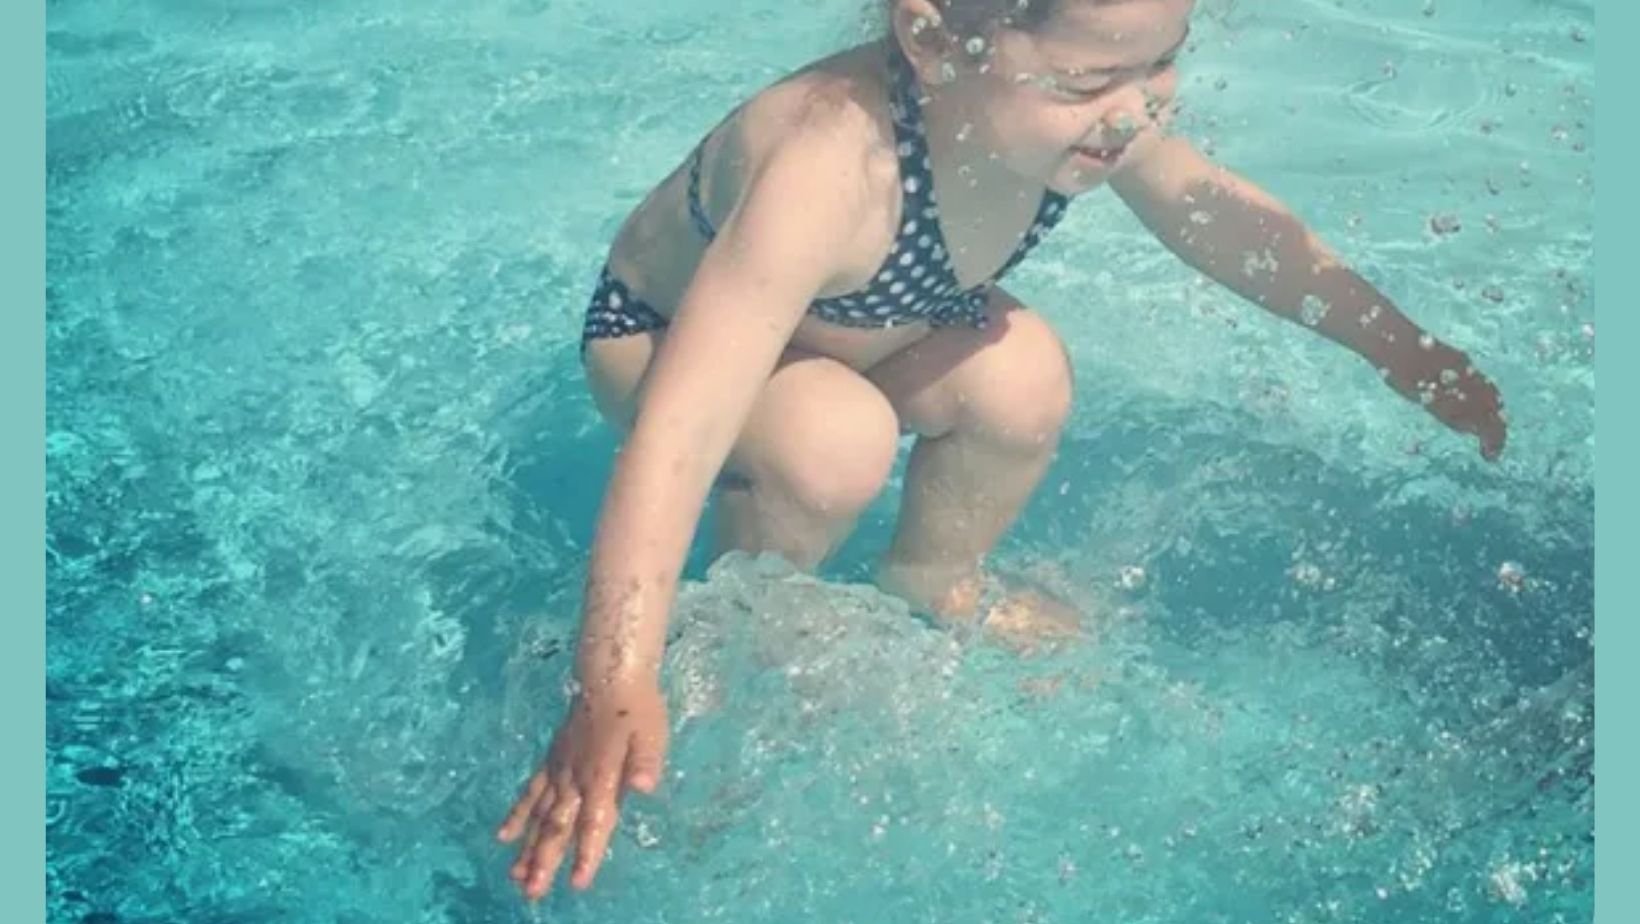 instagram 8.jpg?resize=412,232 - Is The Girl Underwater Or Jumping In A Pool? Viral Photo Left The Internet Confused